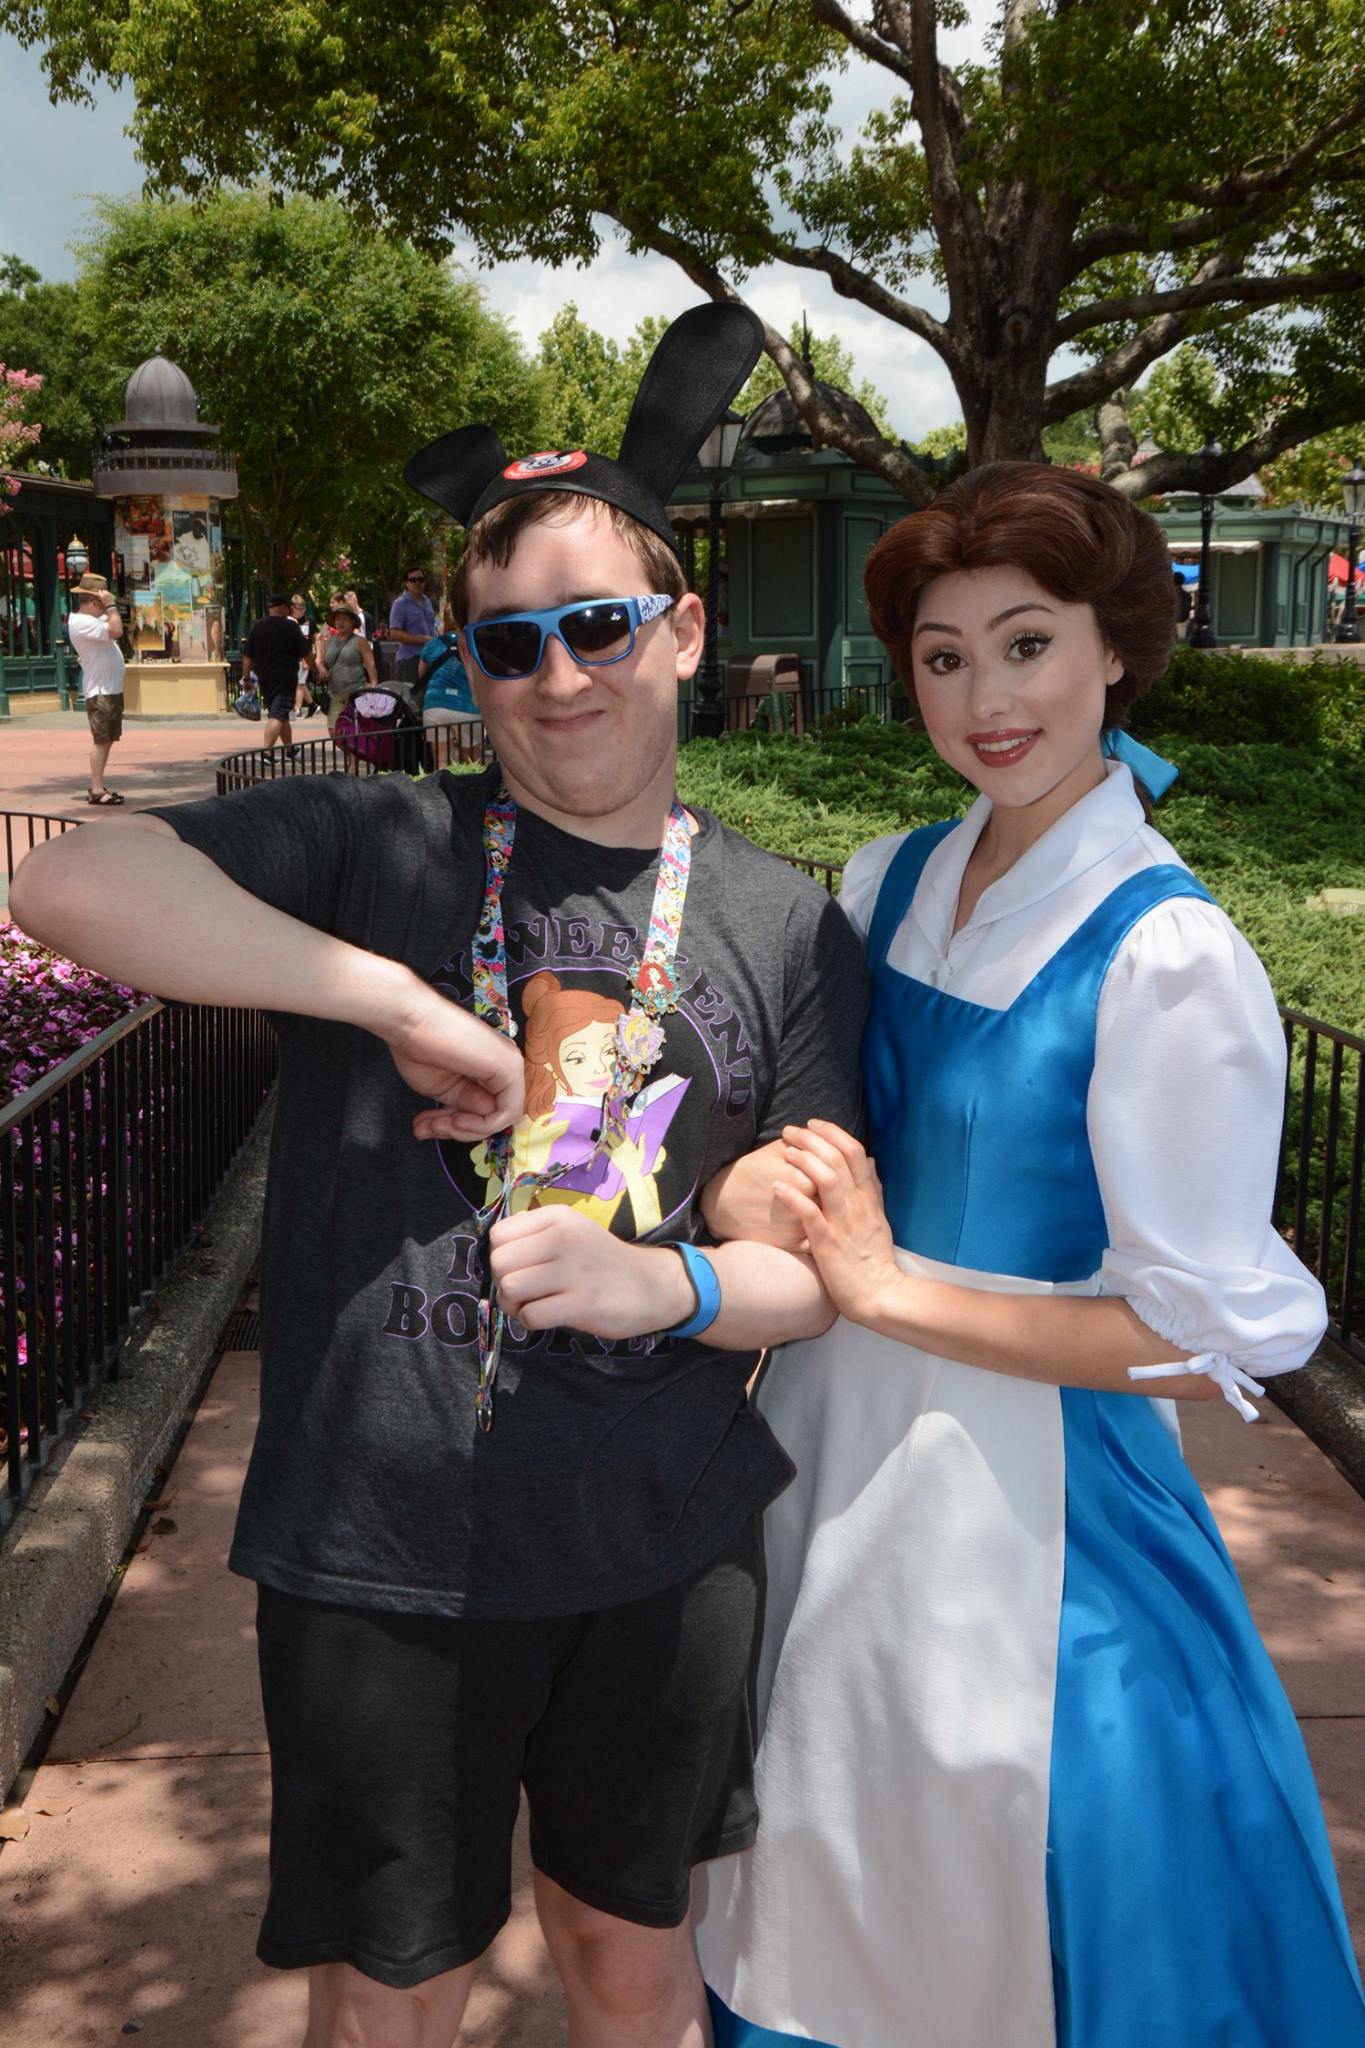 Villager Belle holding my Arm